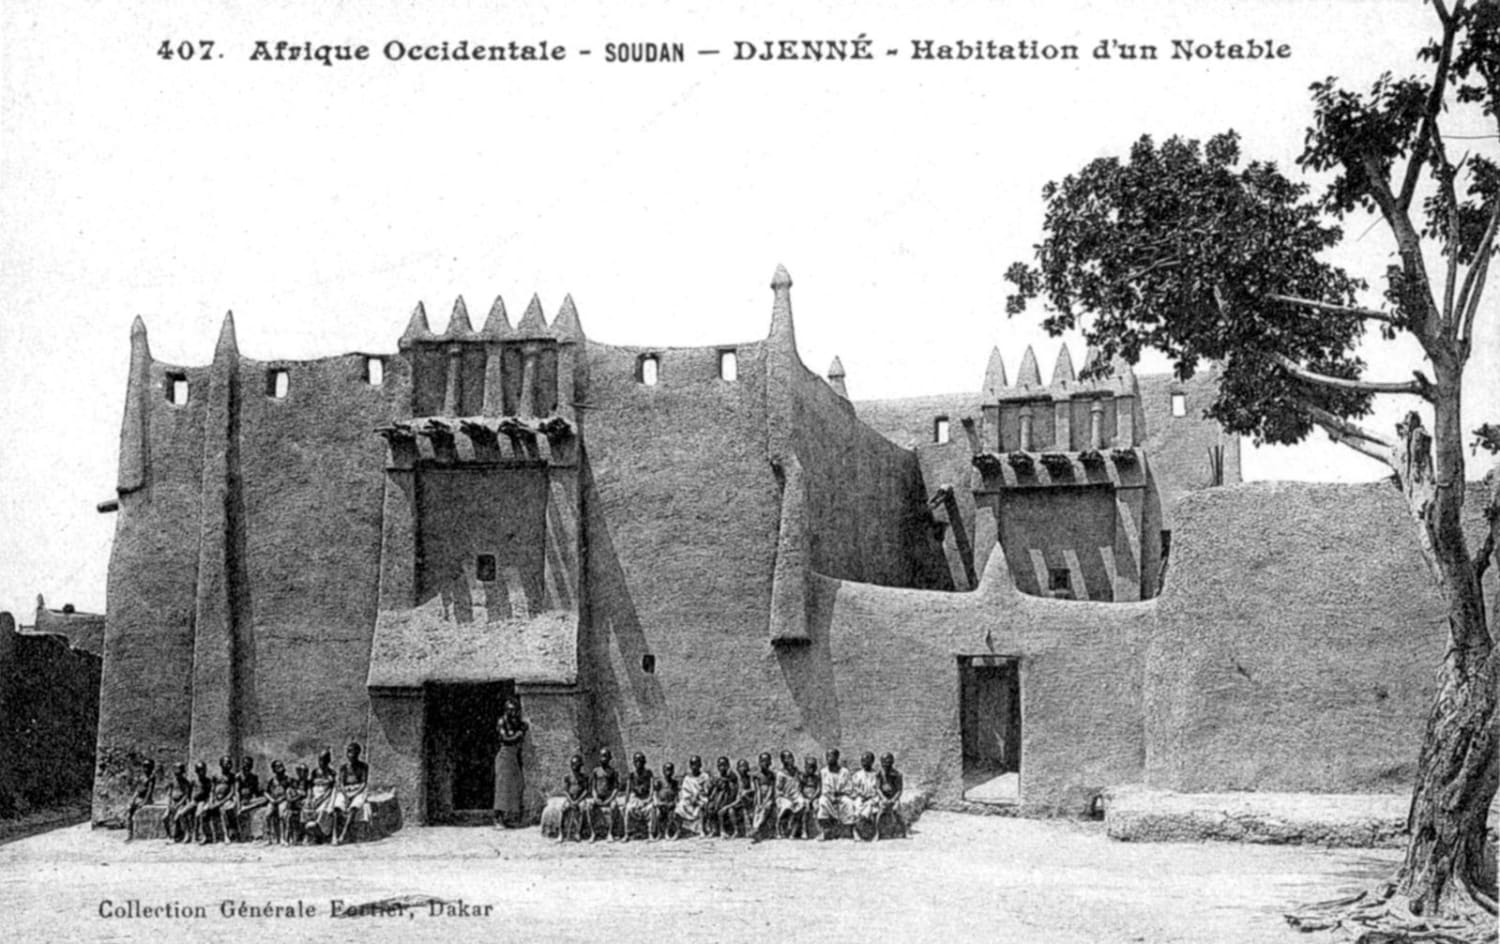 The traditional architectural style of an elite family's home. Djenné, Mali, West Africa - photographed in 1906.